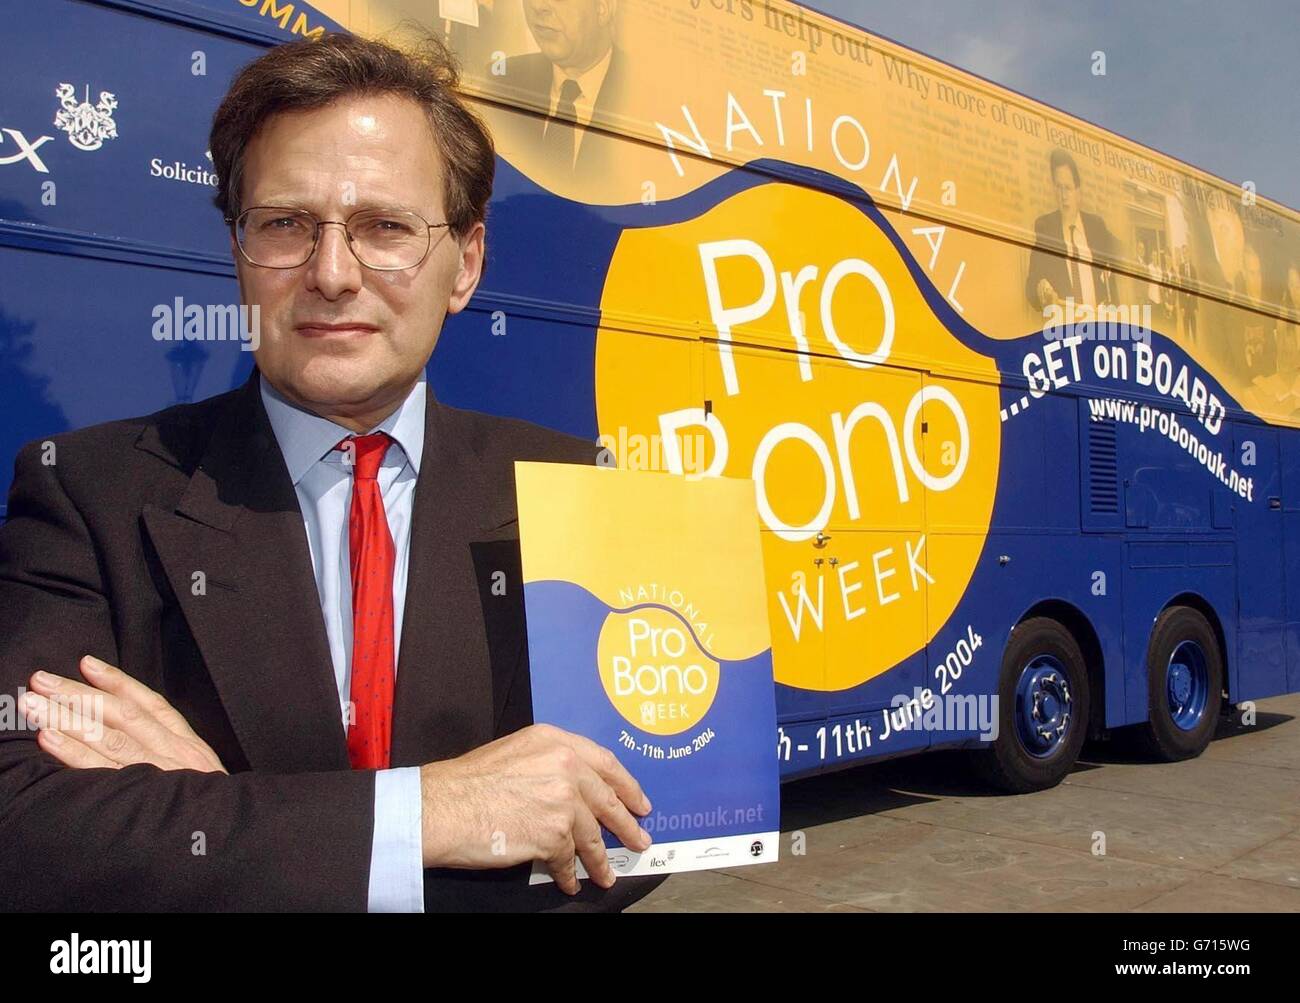 Lord Goldsmith the Attorney General stands in front of the Pro-Bono bus, at the launch of the National Pro-Bono week in Trafalgar Square, Central London. The specially designed double-decker bus will travel around the country, where members of the legal profession will be giving free legal advice to members of the public up and down the country. Stock Photo